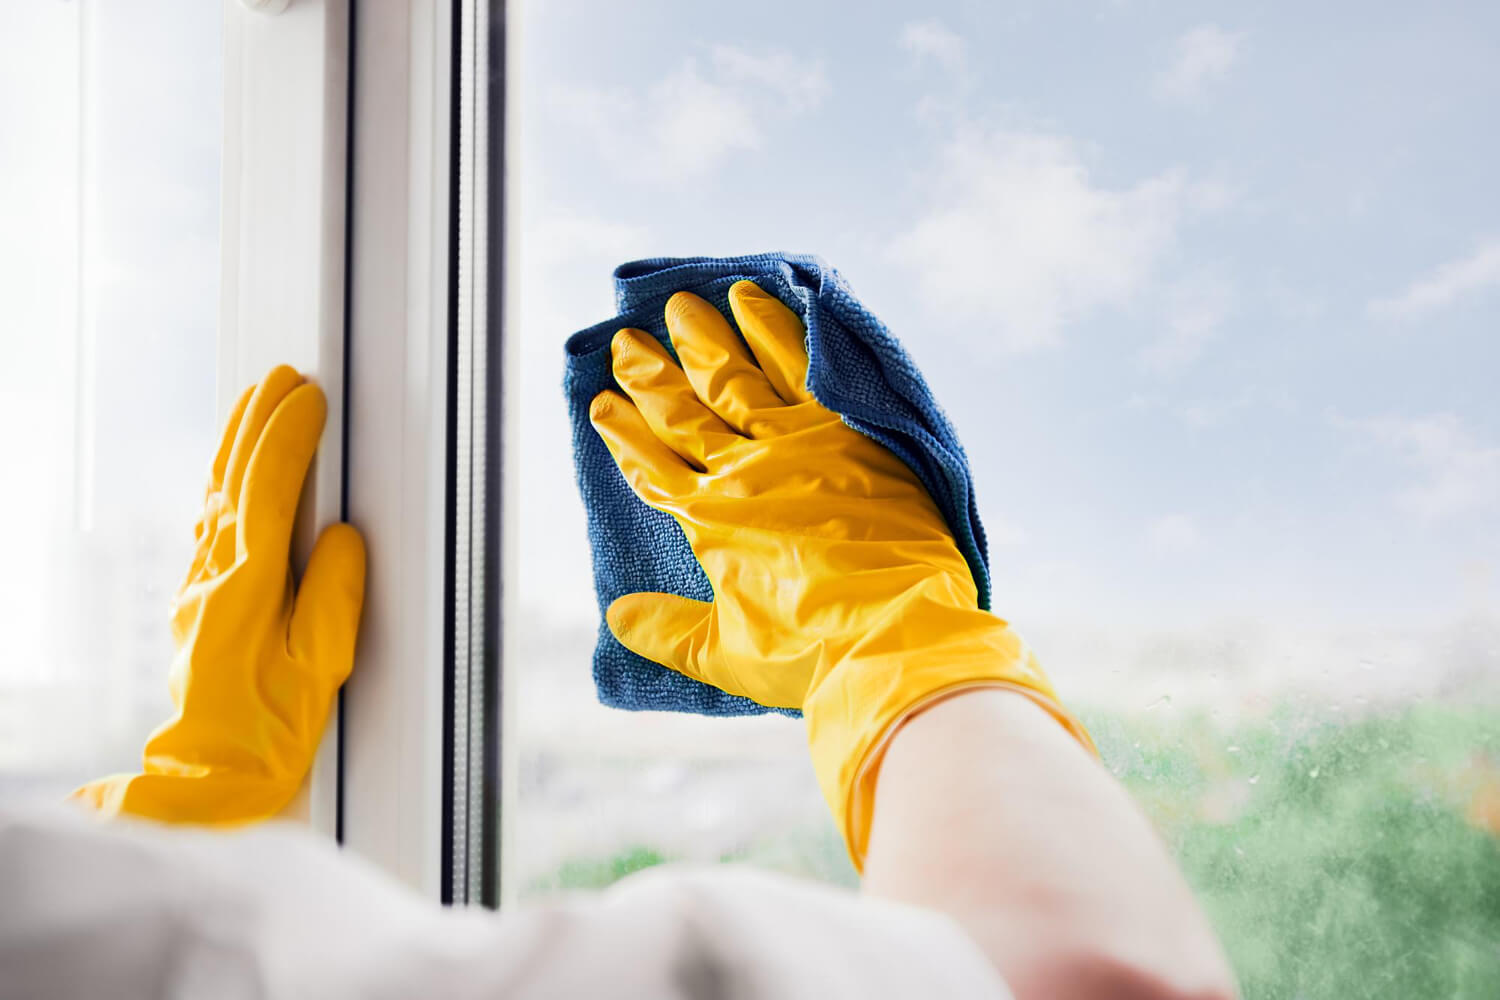 male cleaners hands close up in yellow gloves cleaning window glasse with b;ue squeegee